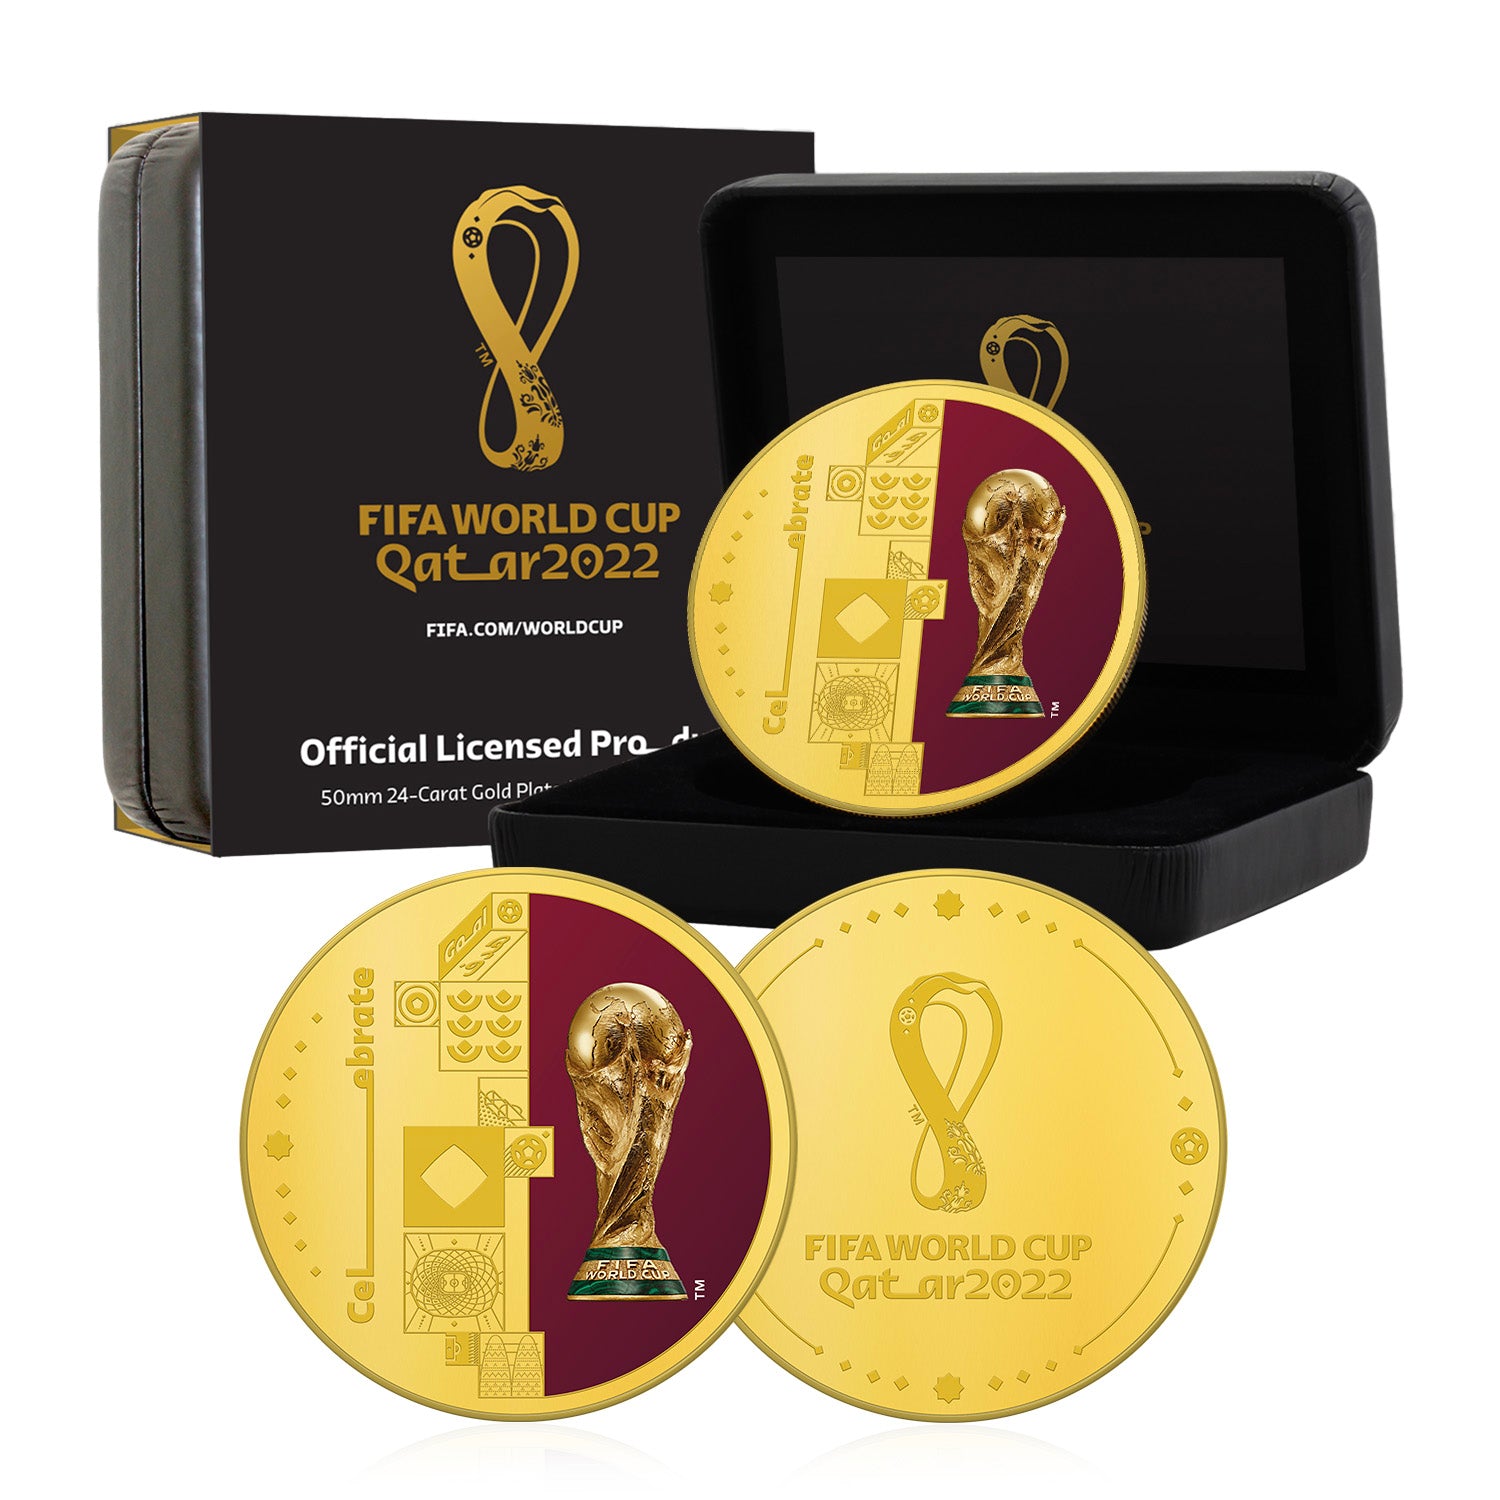 Fifa World Cup Champions 2022 Sleeve Badge - OFFICIAL LICENSED PRODUCT